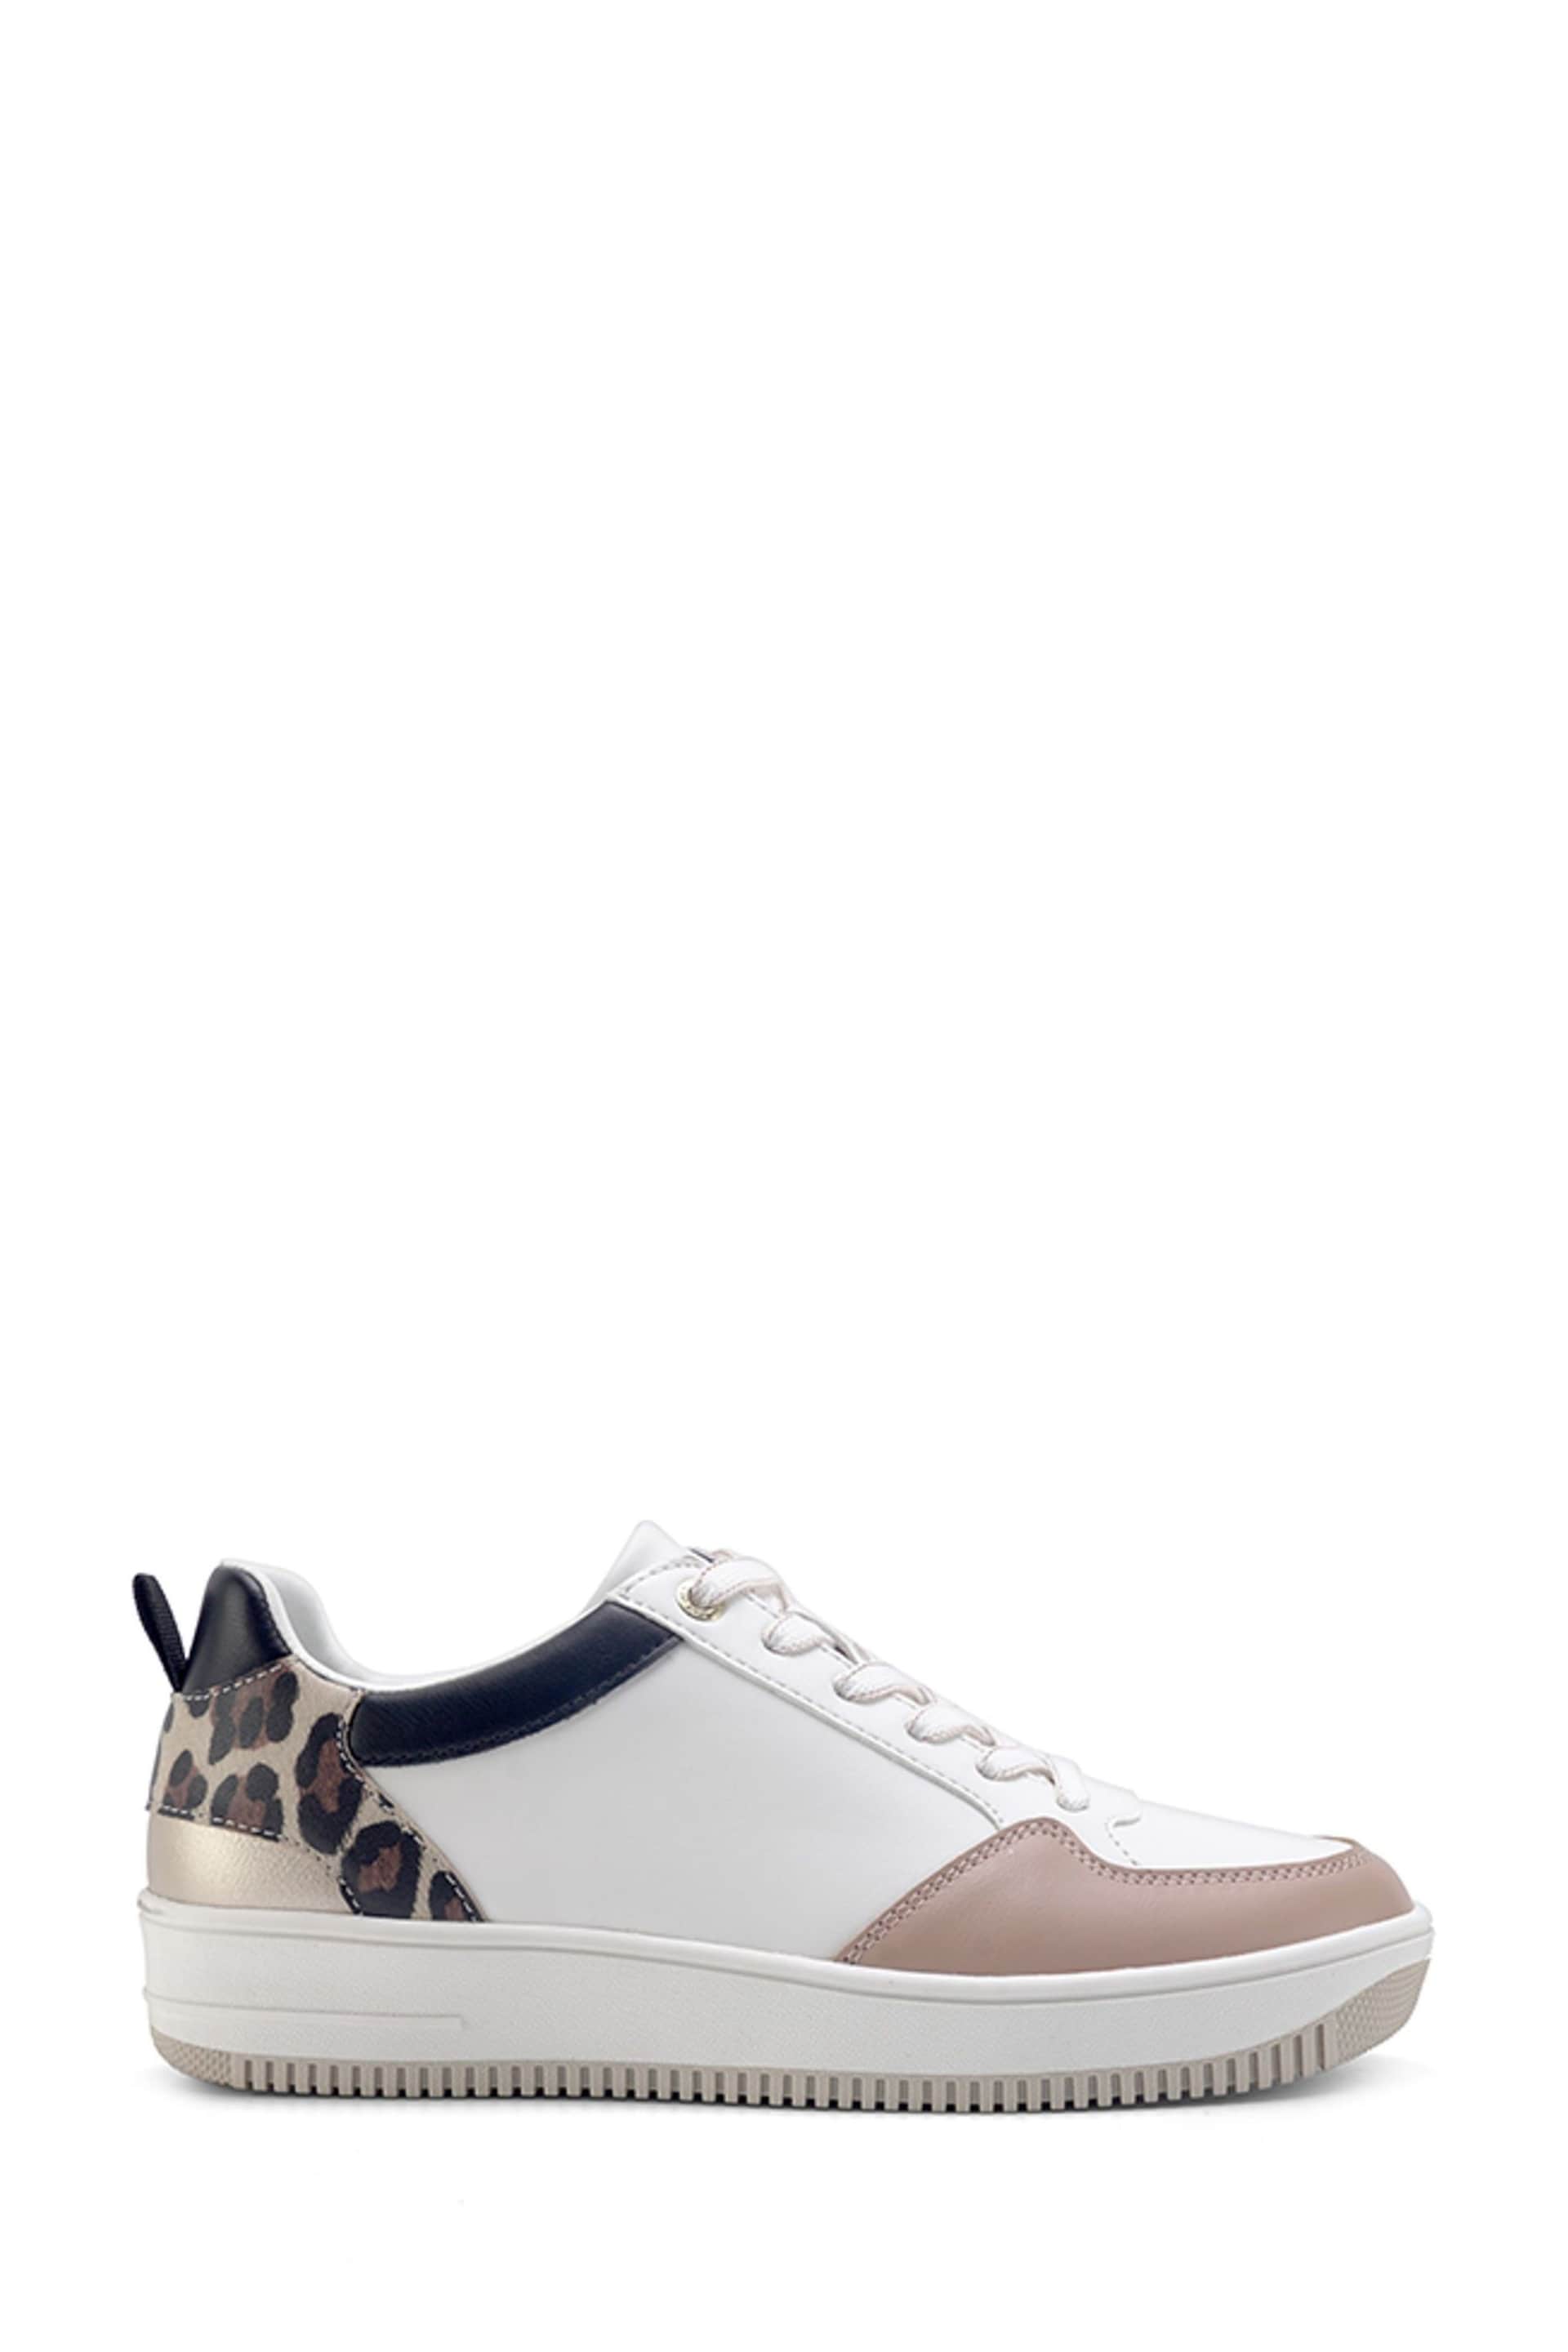 Nine West Womens 'Sileo' White Trainers with Leopard - Image 1 of 3